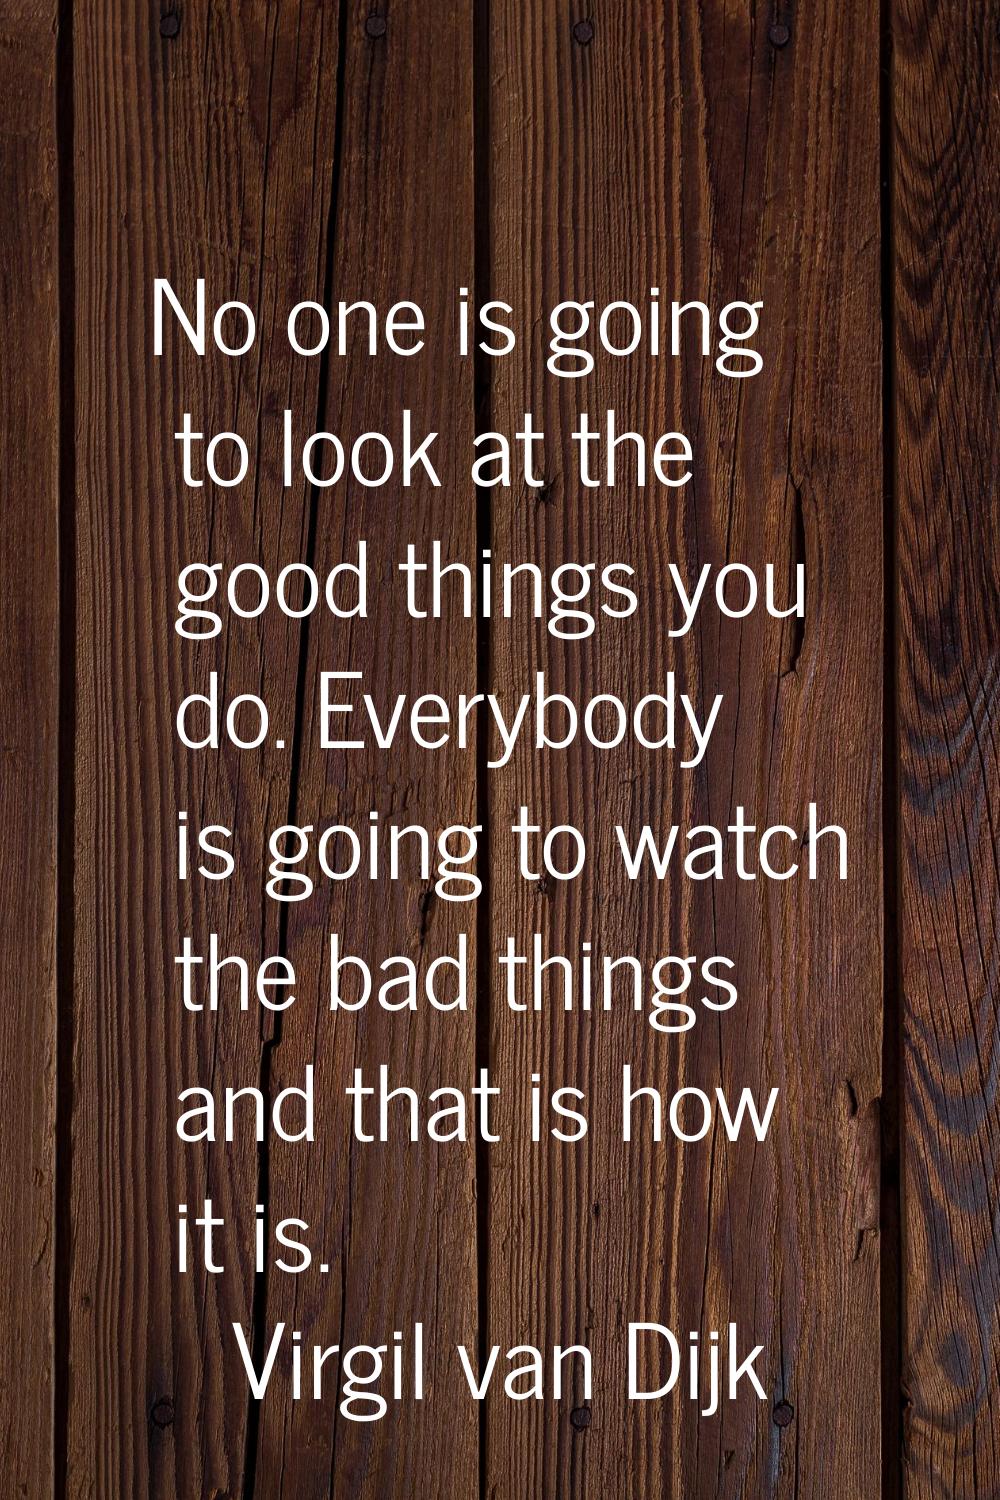 No one is going to look at the good things you do. Everybody is going to watch the bad things and t